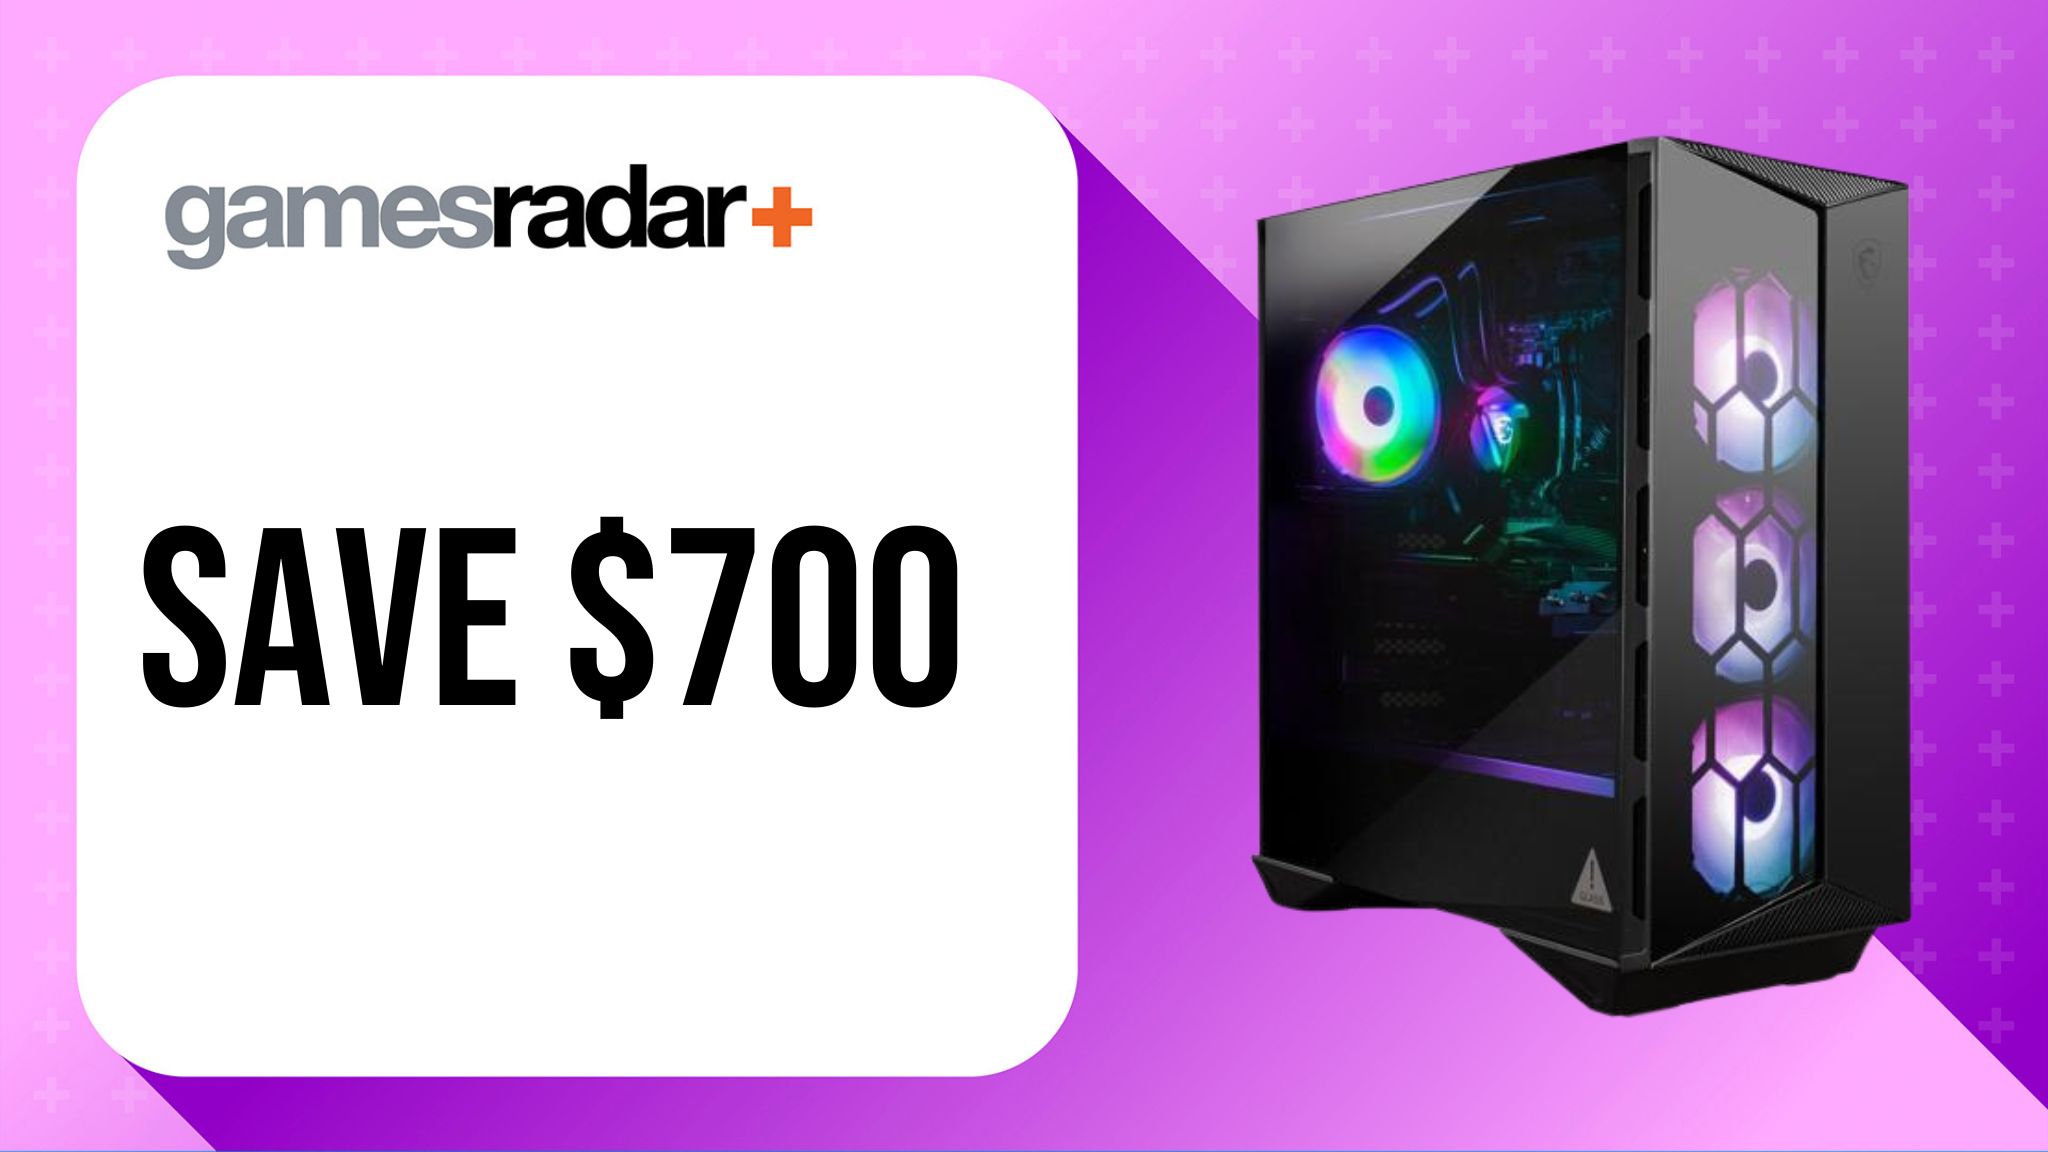 MSI Aegis R Deal Image Saves $700 With Purple Background